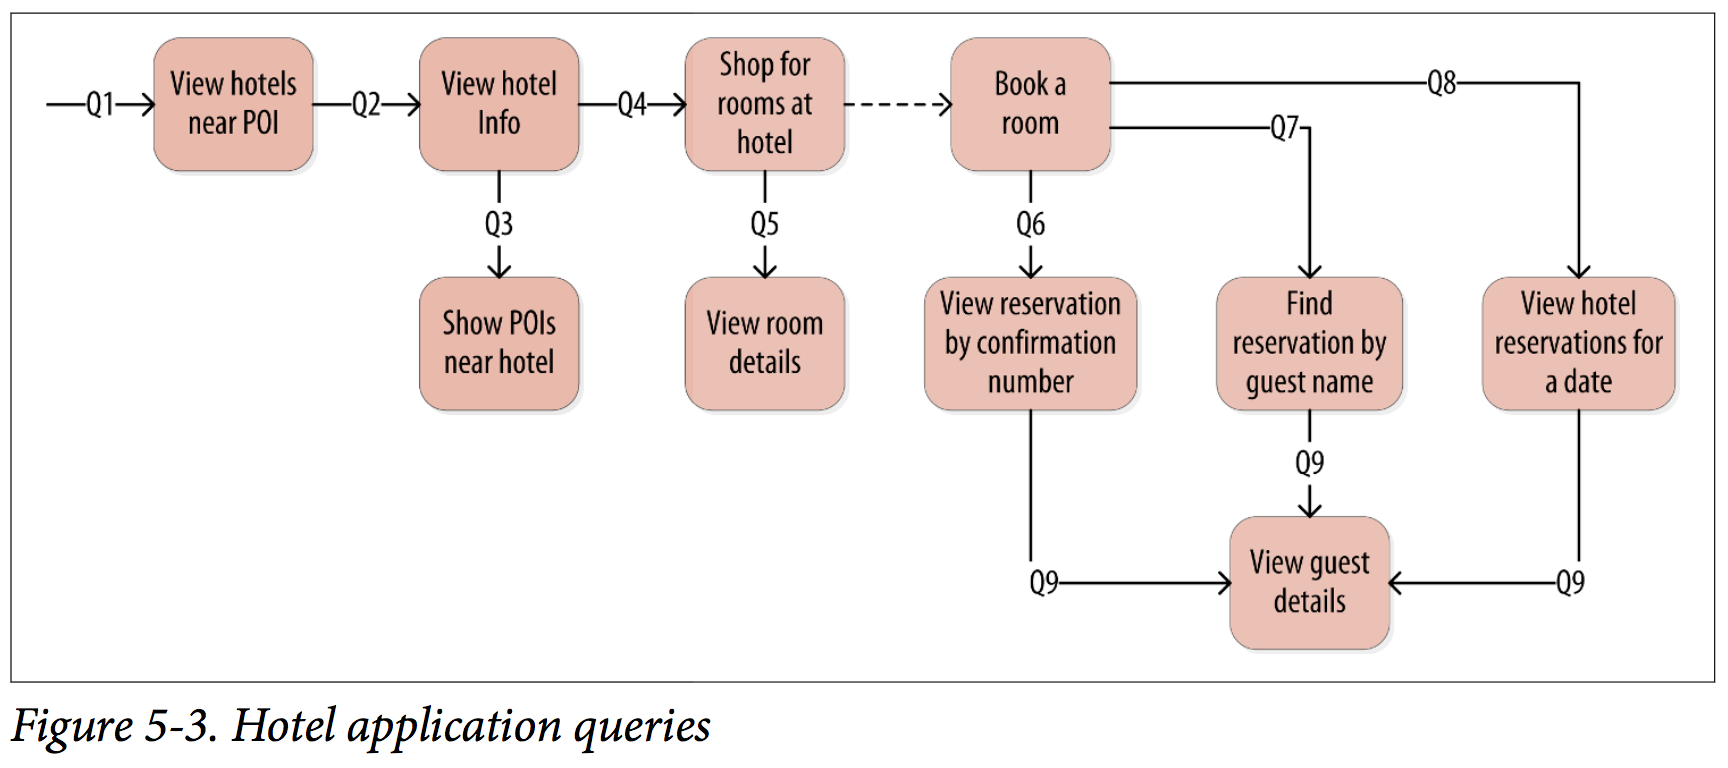 Hotel Application Queries